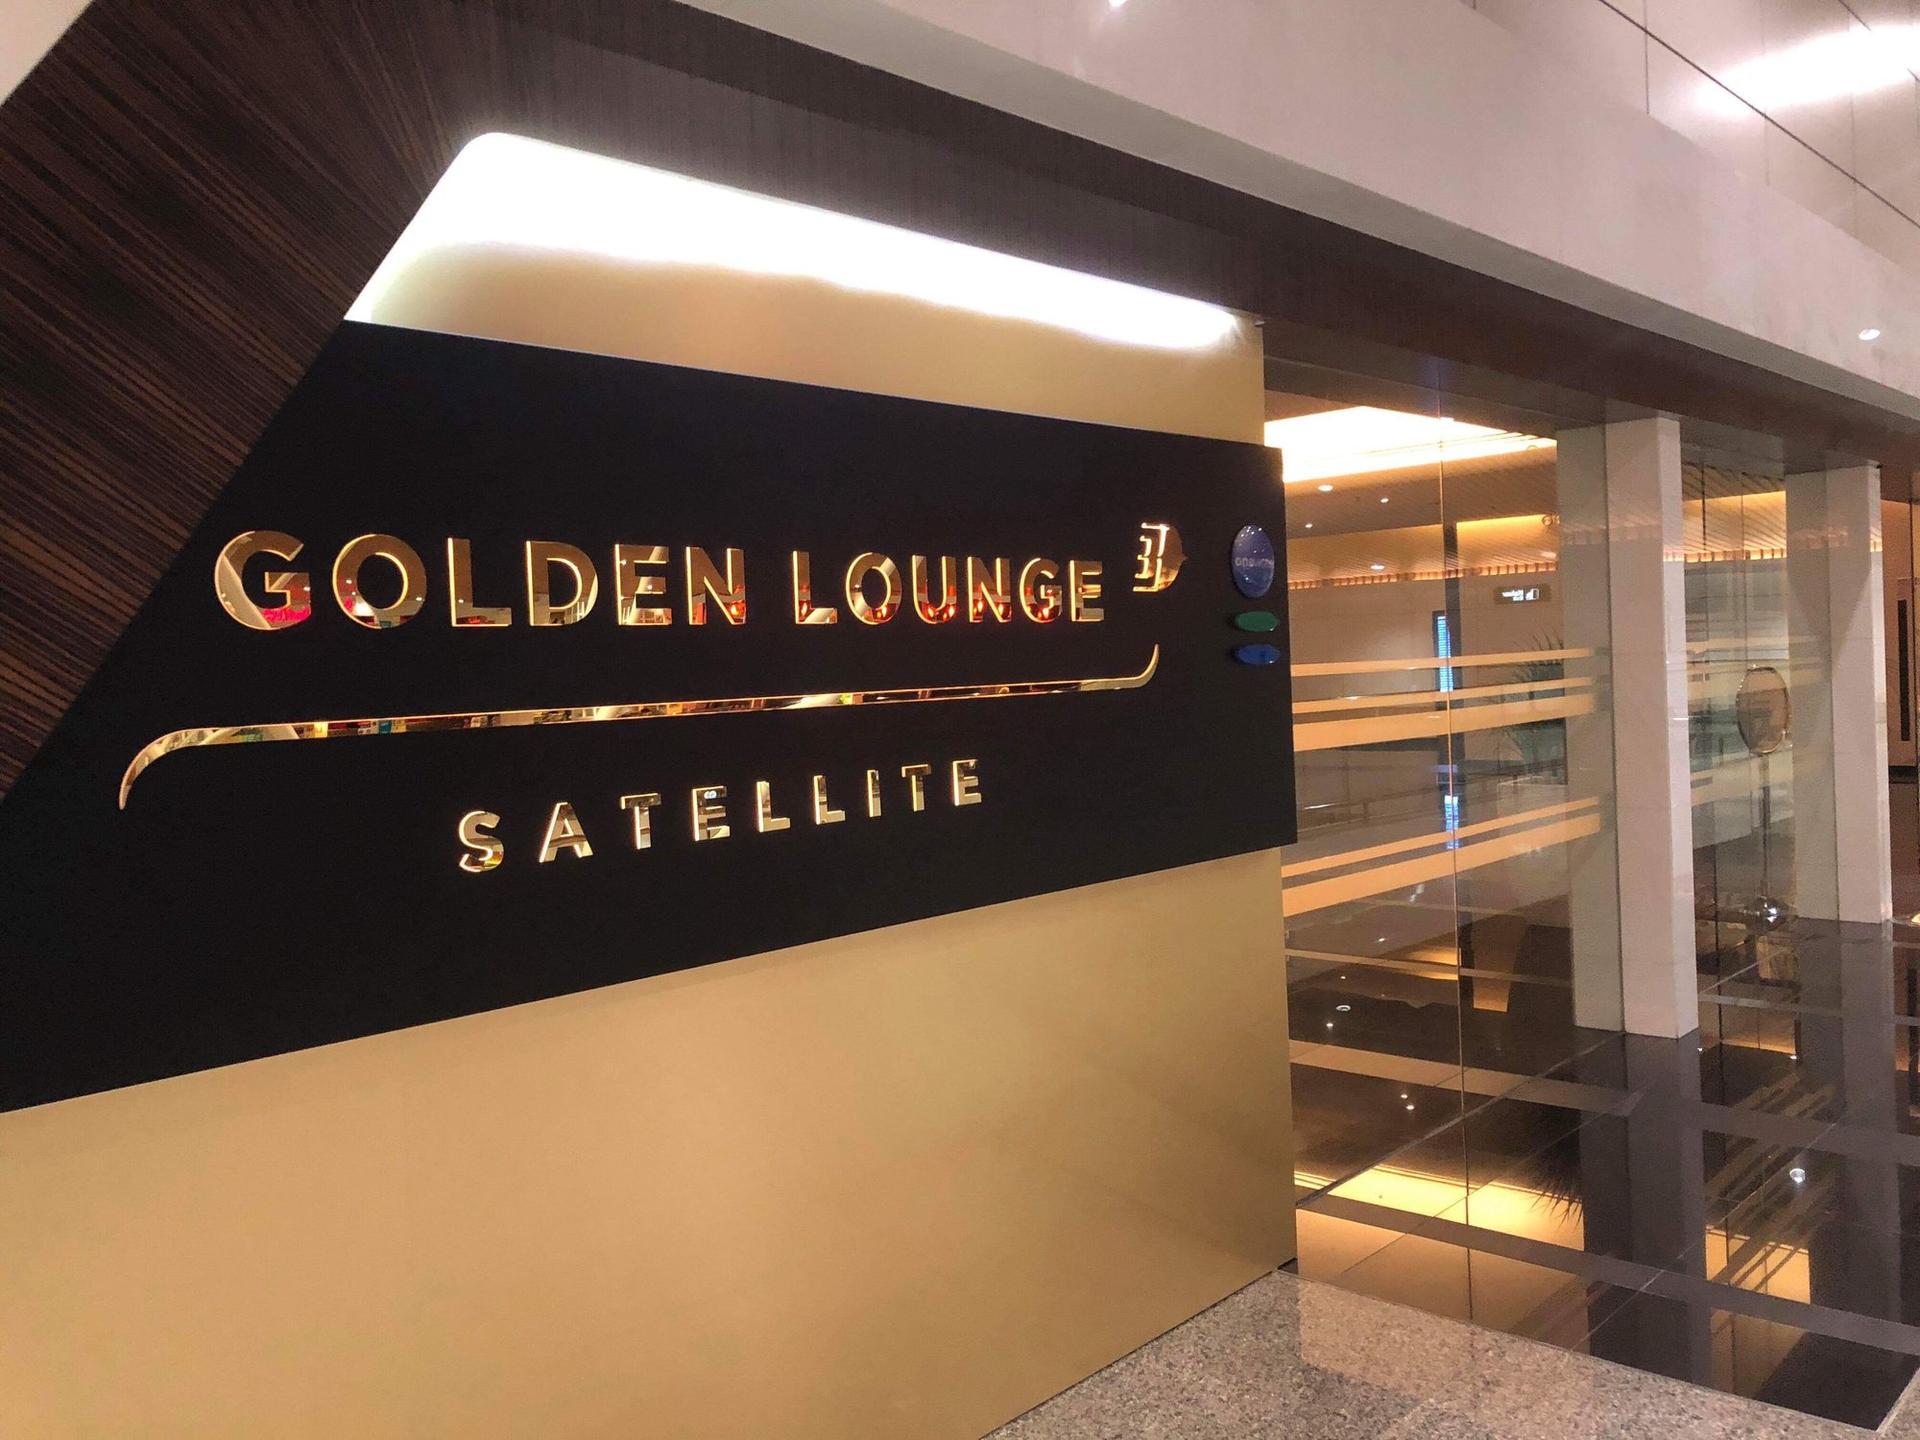 Malaysia Airlines Golden Business Class Lounge image 13 of 27